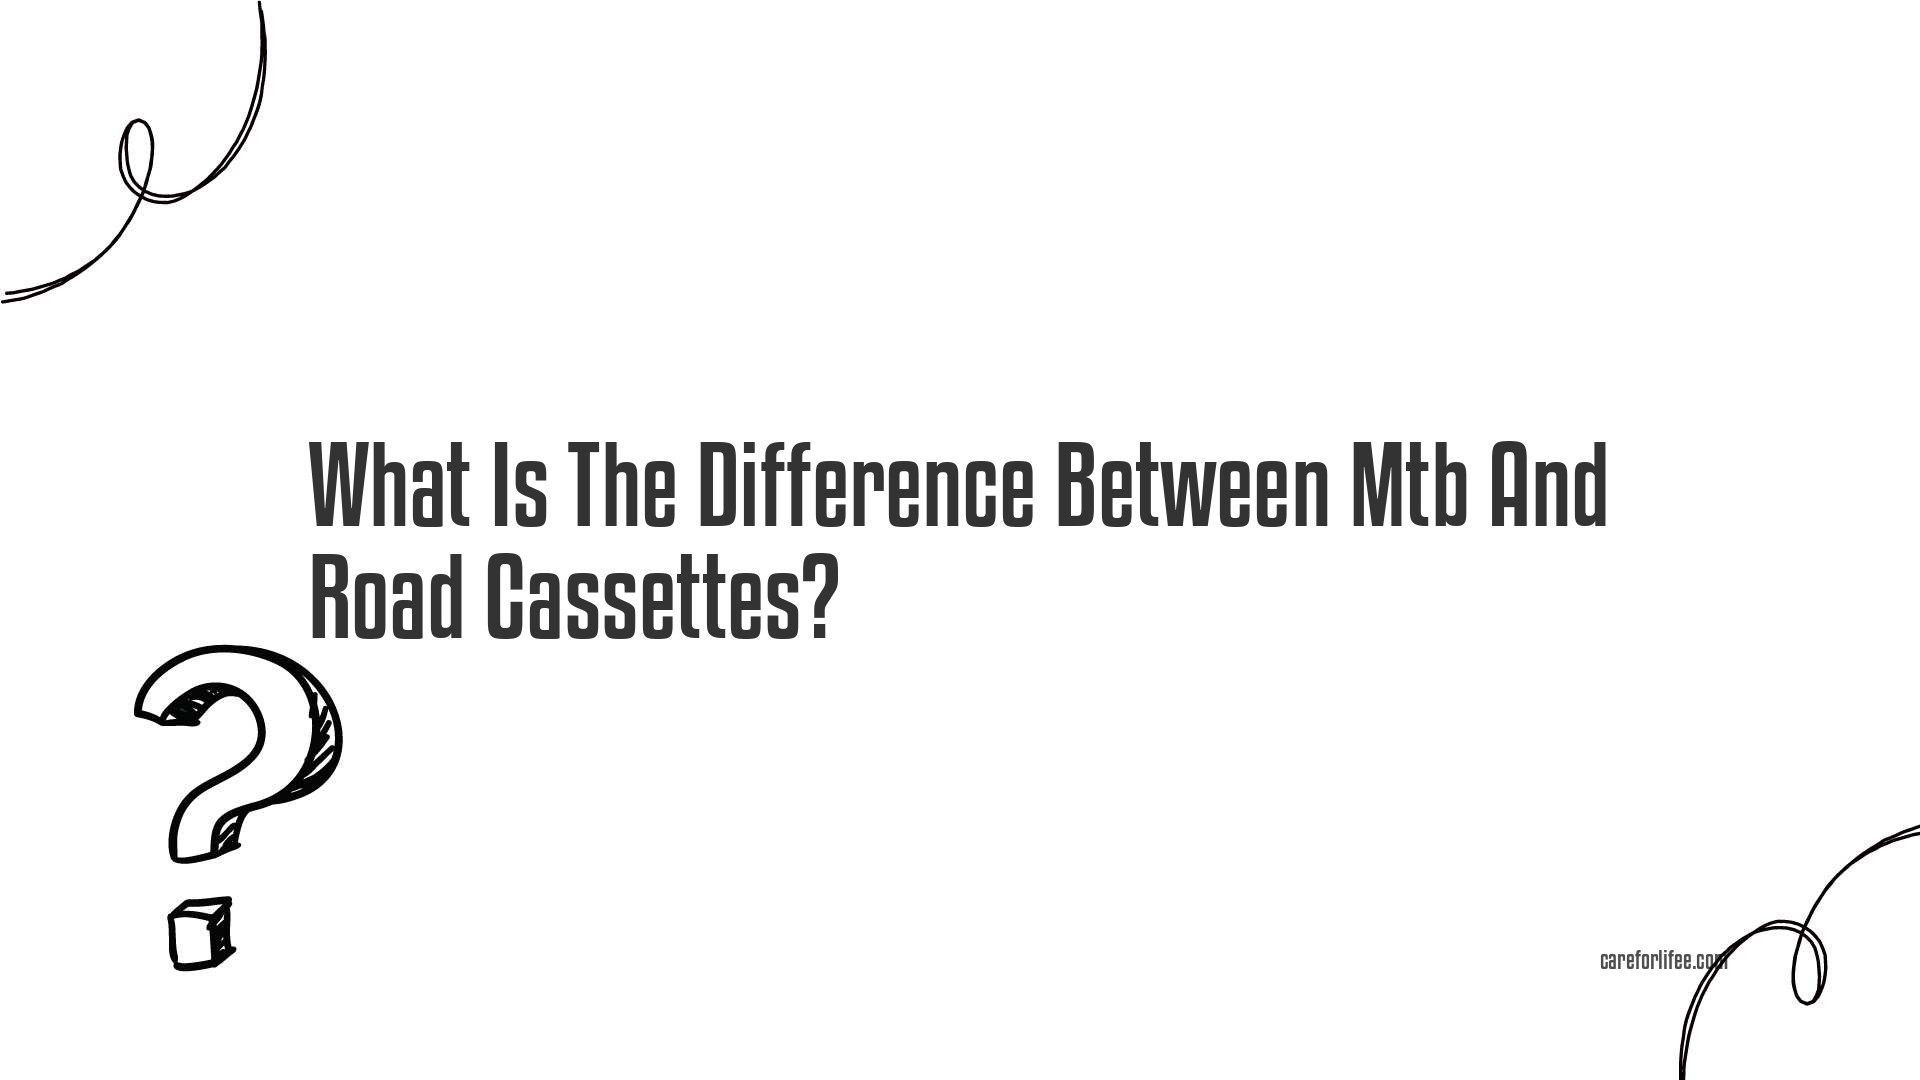 What Is The Difference Between Mtb And Road Cassettes?